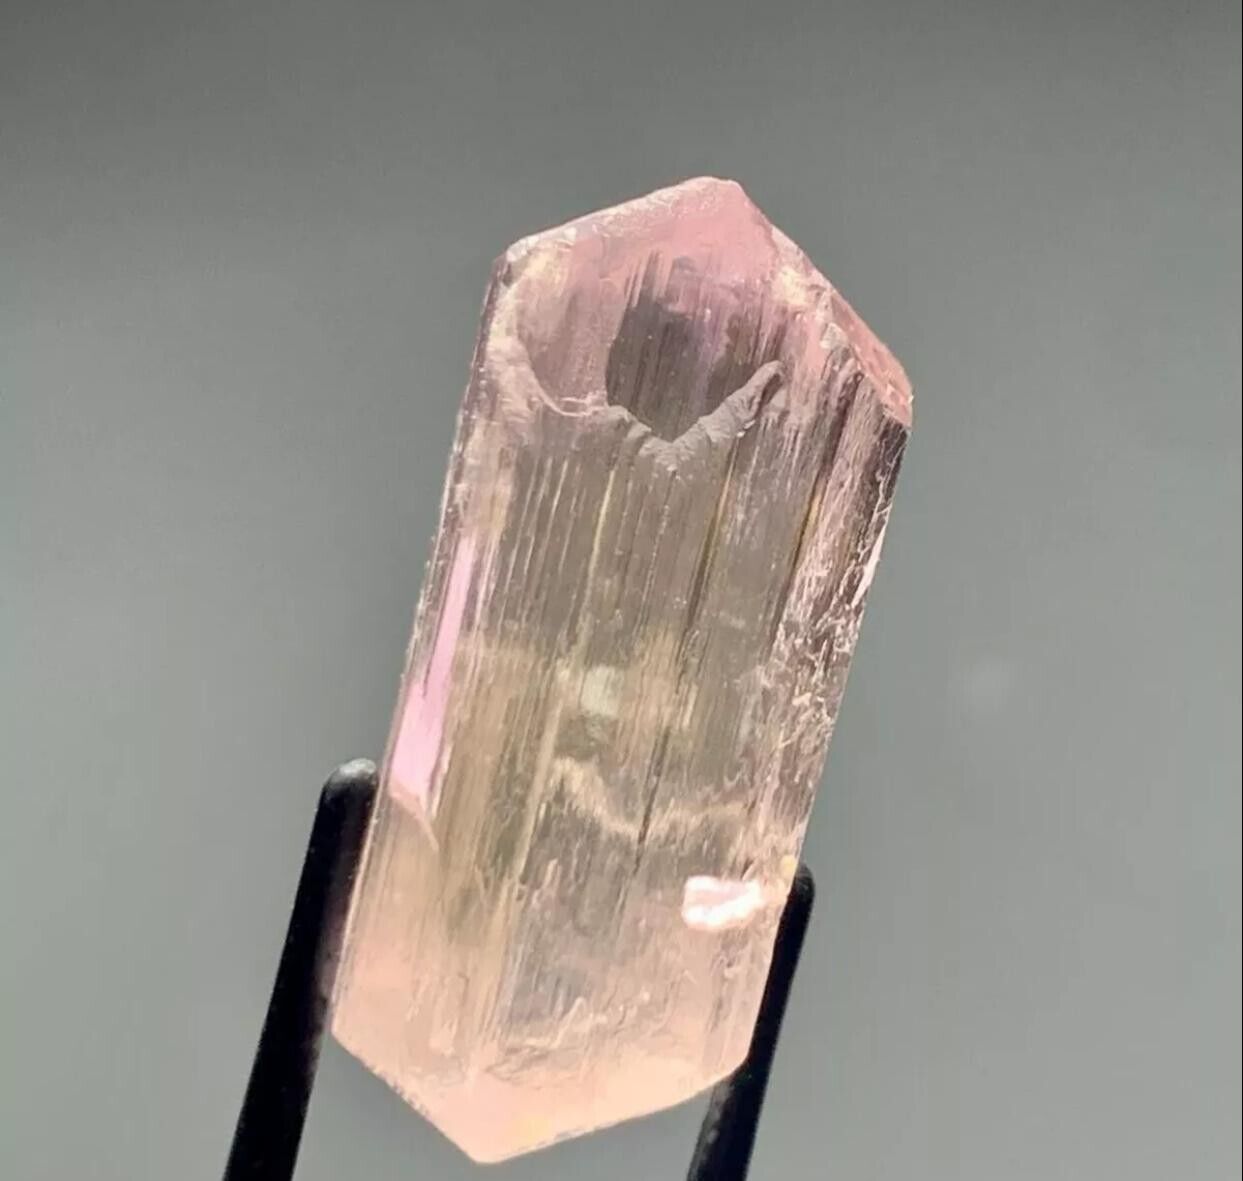 25.30 Cts Beautiful Faceted Double Terminated Pink Kunzite crystal @afgh